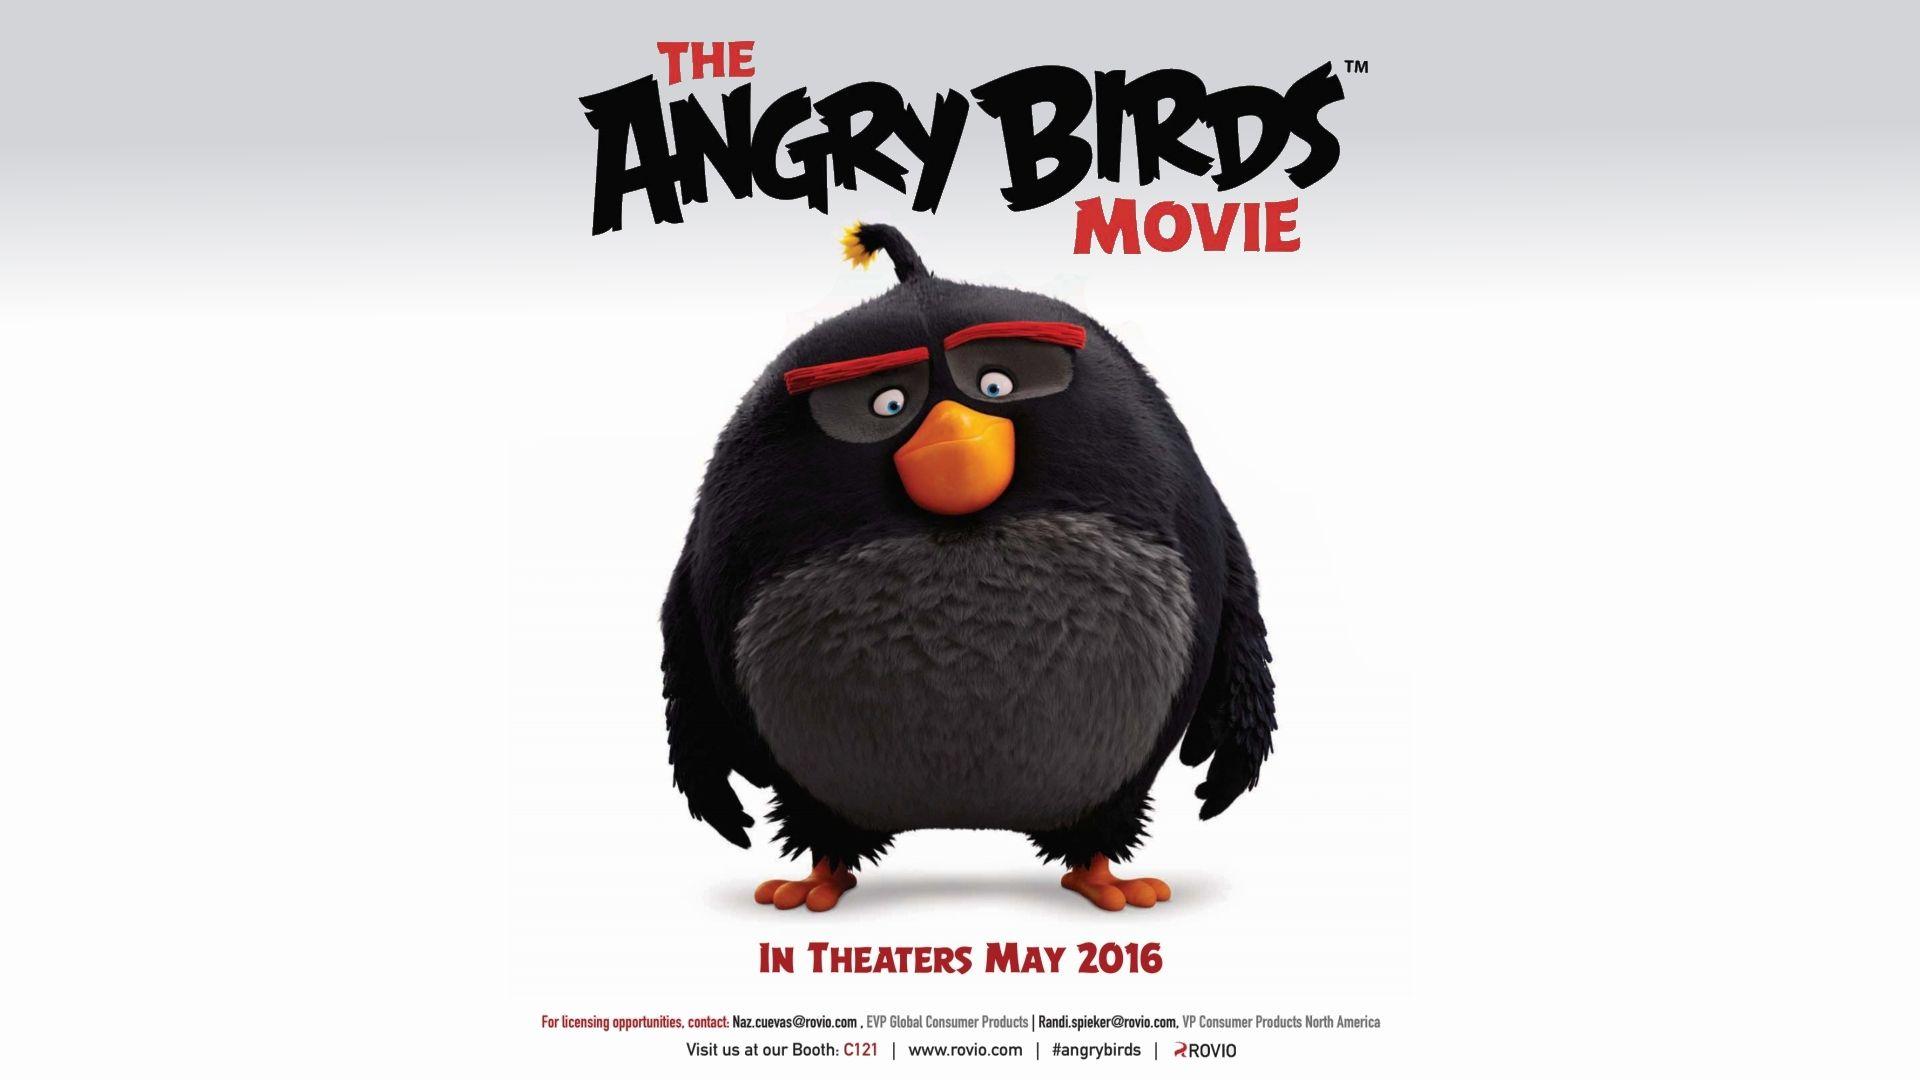 THE ANGRY BIRDS MOVIE is Here! Yes, ANGRY BIRDS; It's a